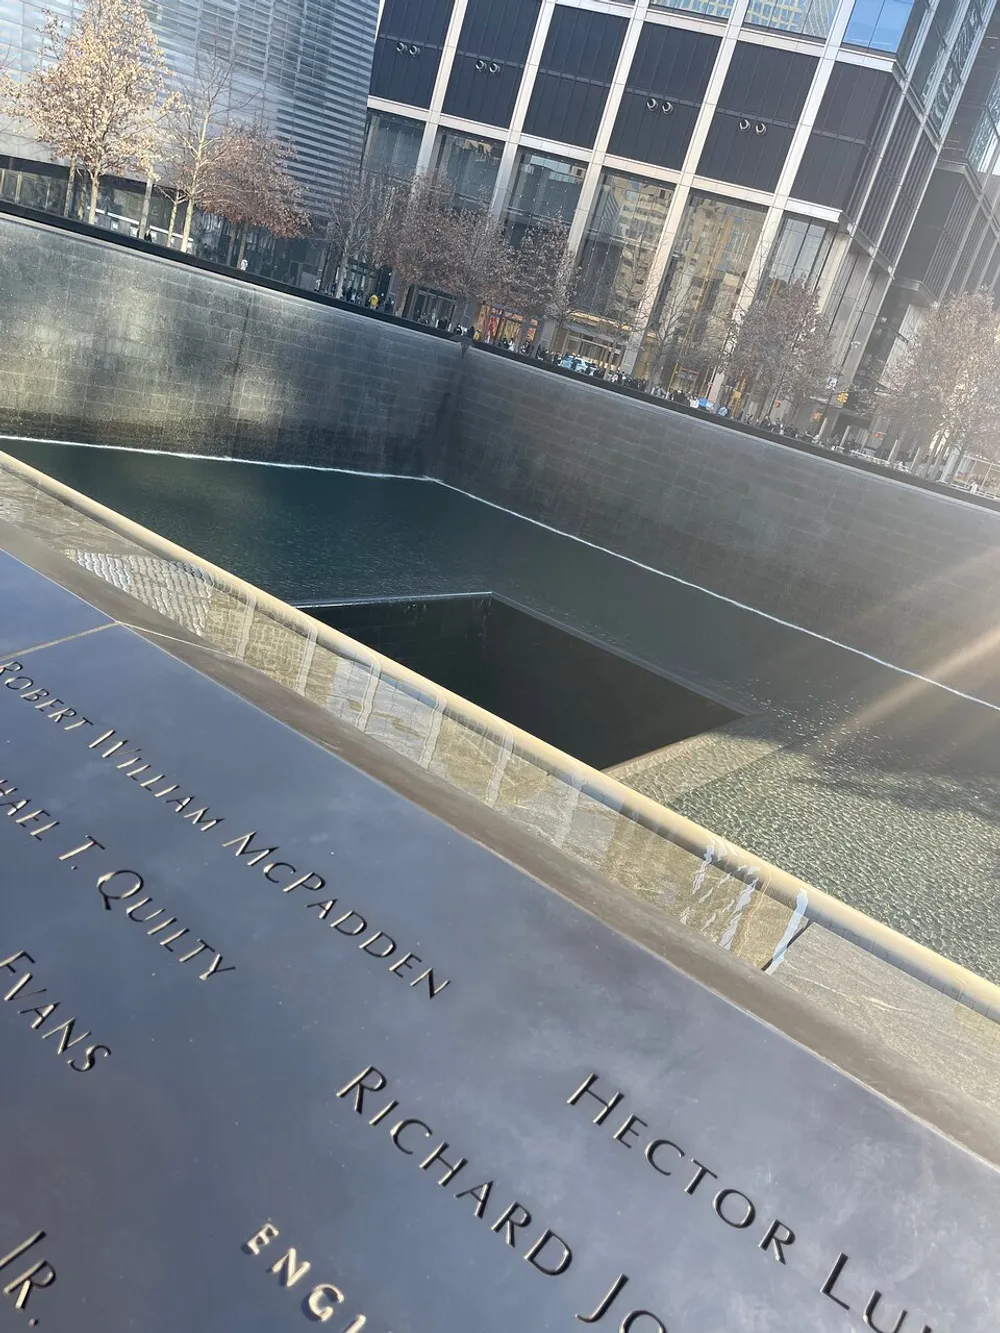 The image shows a reflective pool with water cascading down its sides surrounded by bronze panels inscribed with names creating a solemn and contemplative atmosphere